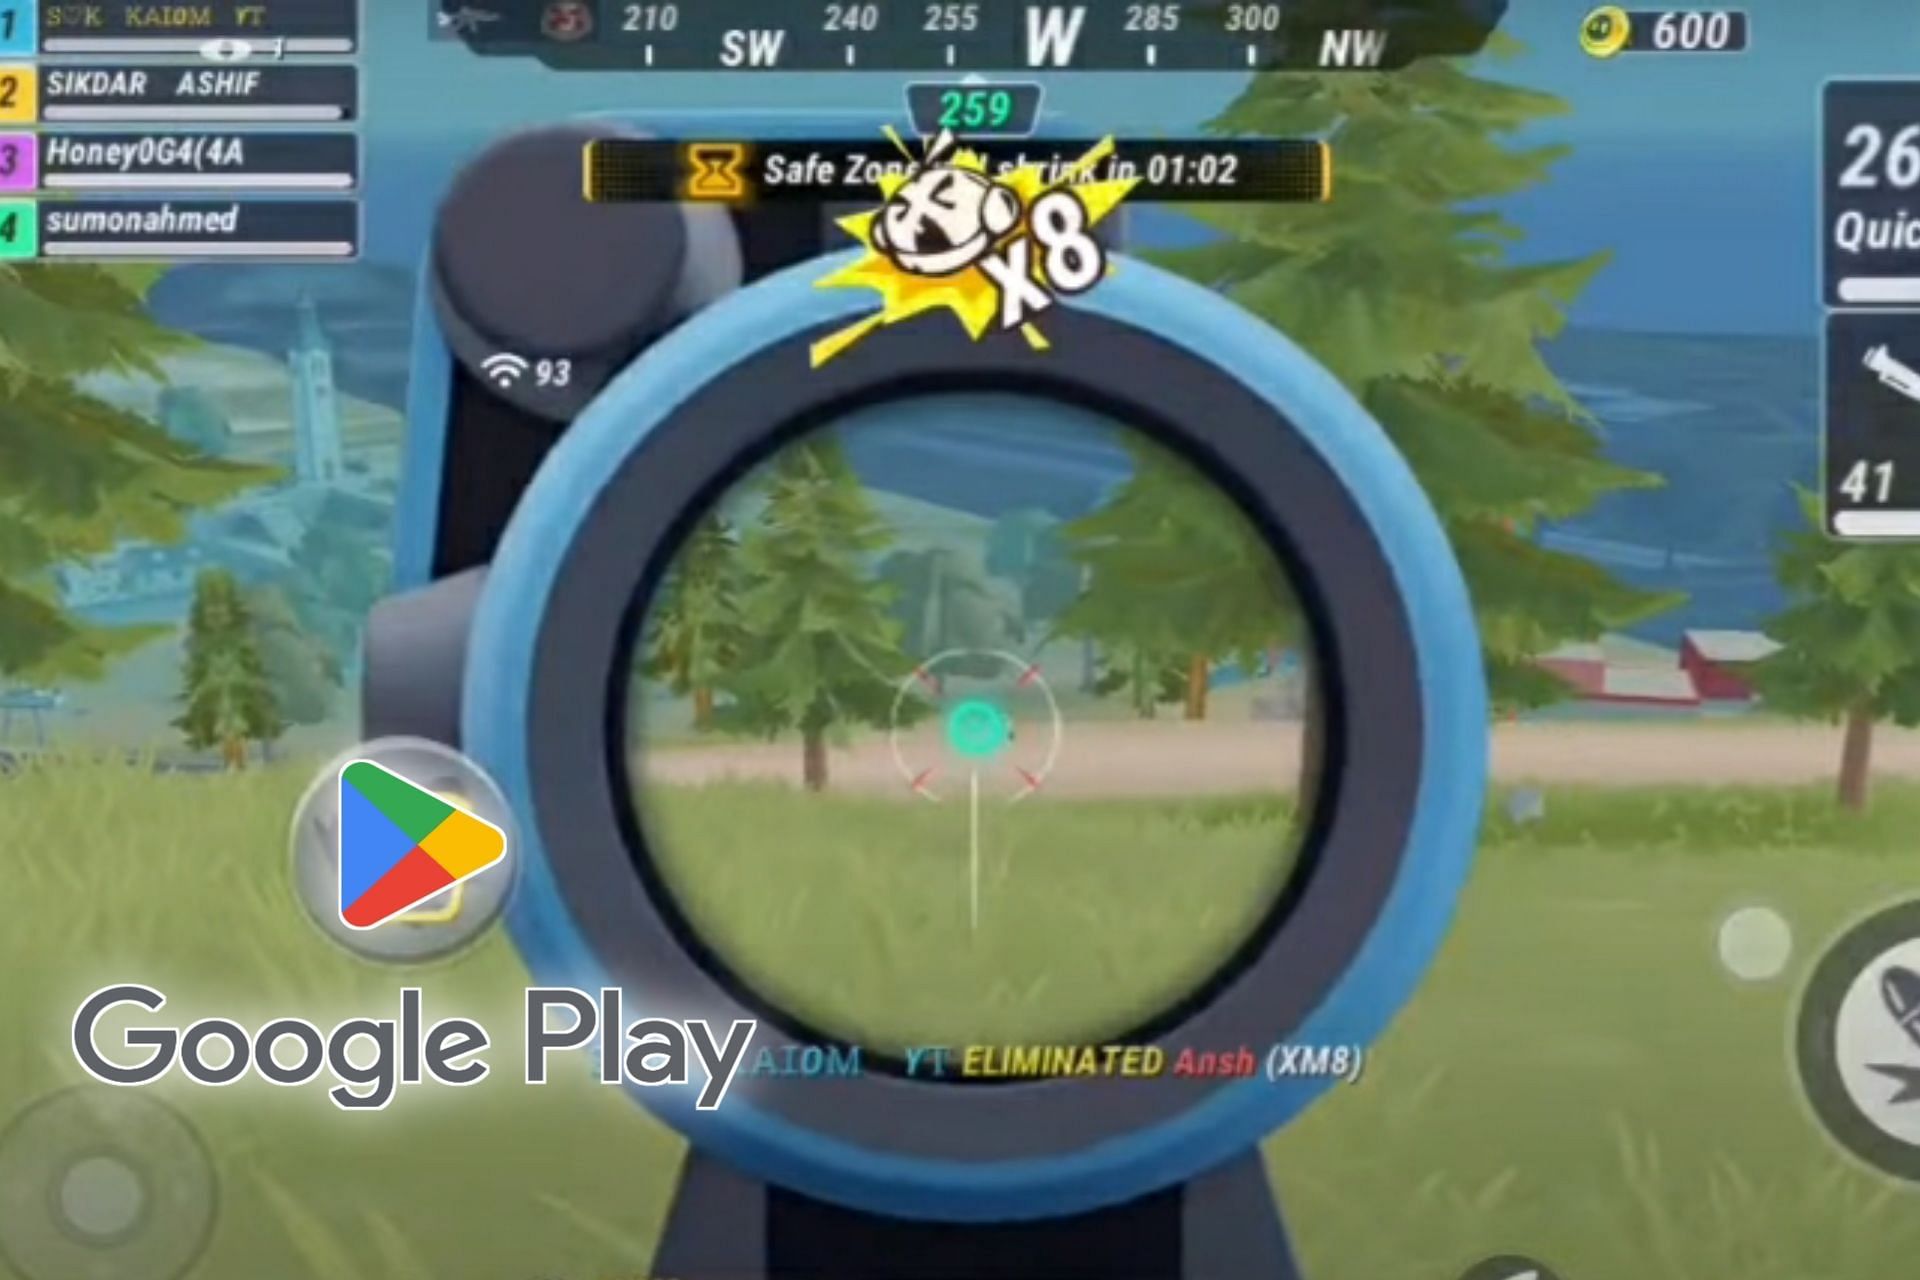 Is Sigma Battle Royale available on the Google Play Store?